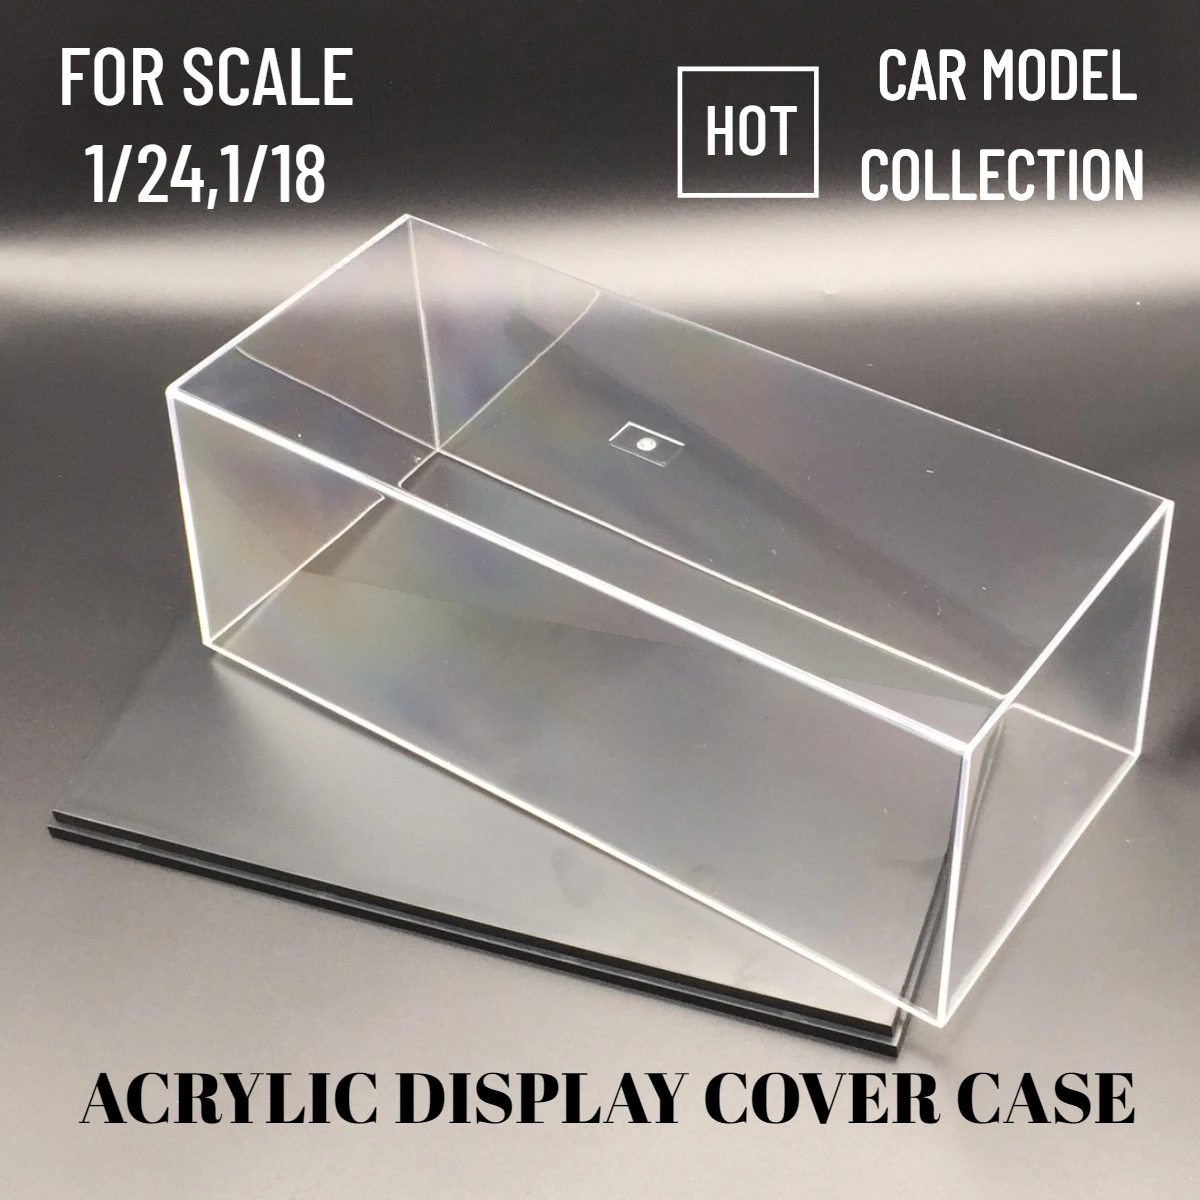 Scale 1:24 1:18 Car Model Display Case Transparent Acrylic Dust Proof Hard Cover PVC Box for Figure Collectible Miniature transparent acrylic hard cover case pvc display box for scale 1 43 1 64 car model collectible miniature figure toy protection